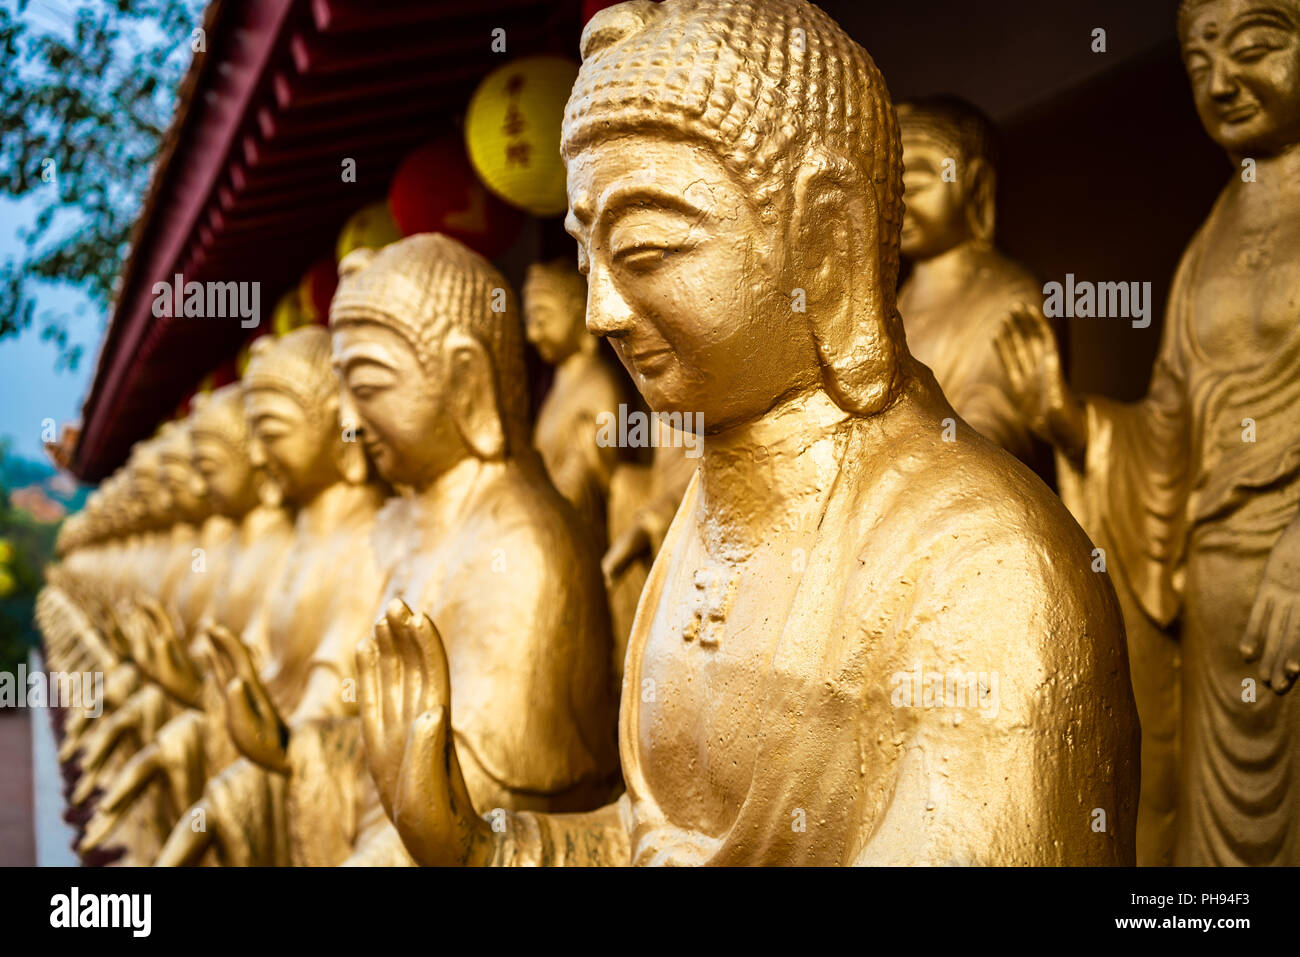 Close-up view of statues of golden standing Buddha at Fo Guang Shan Monastery in Kaohsiung Taiwan Stock Photo